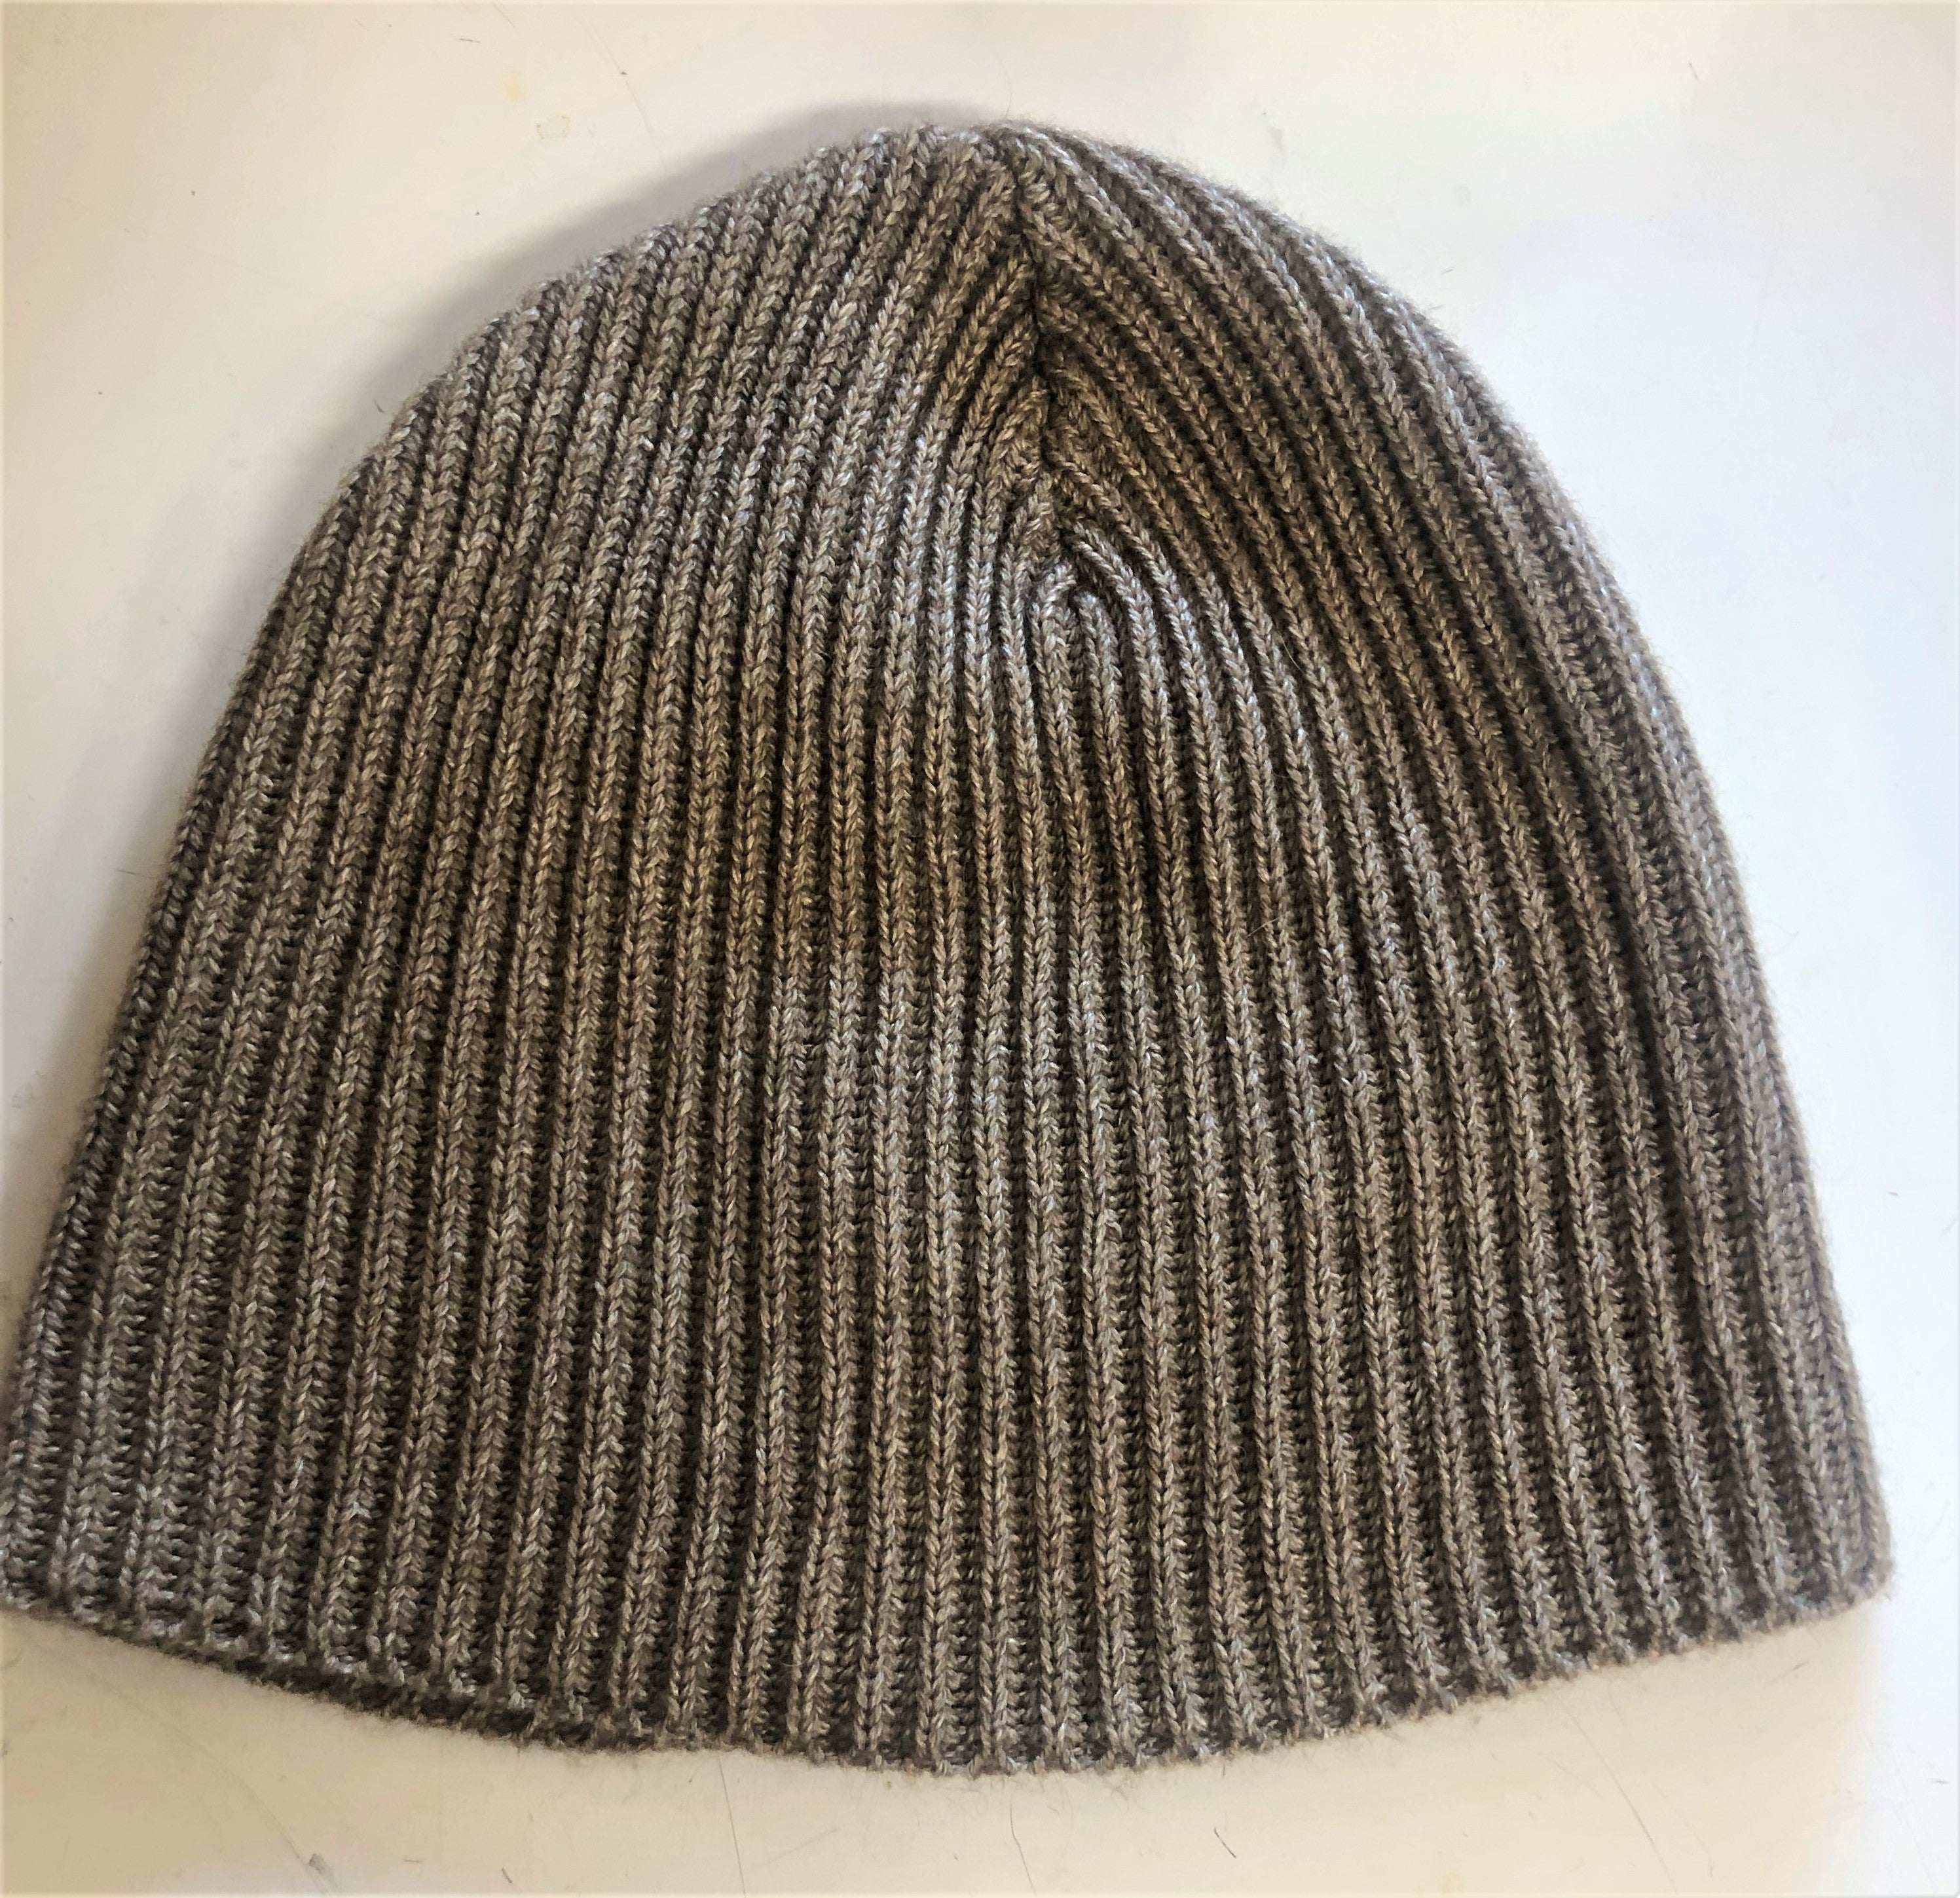 "Zoo" Beanie - A wild animal blend of bison down, baby camel and silk